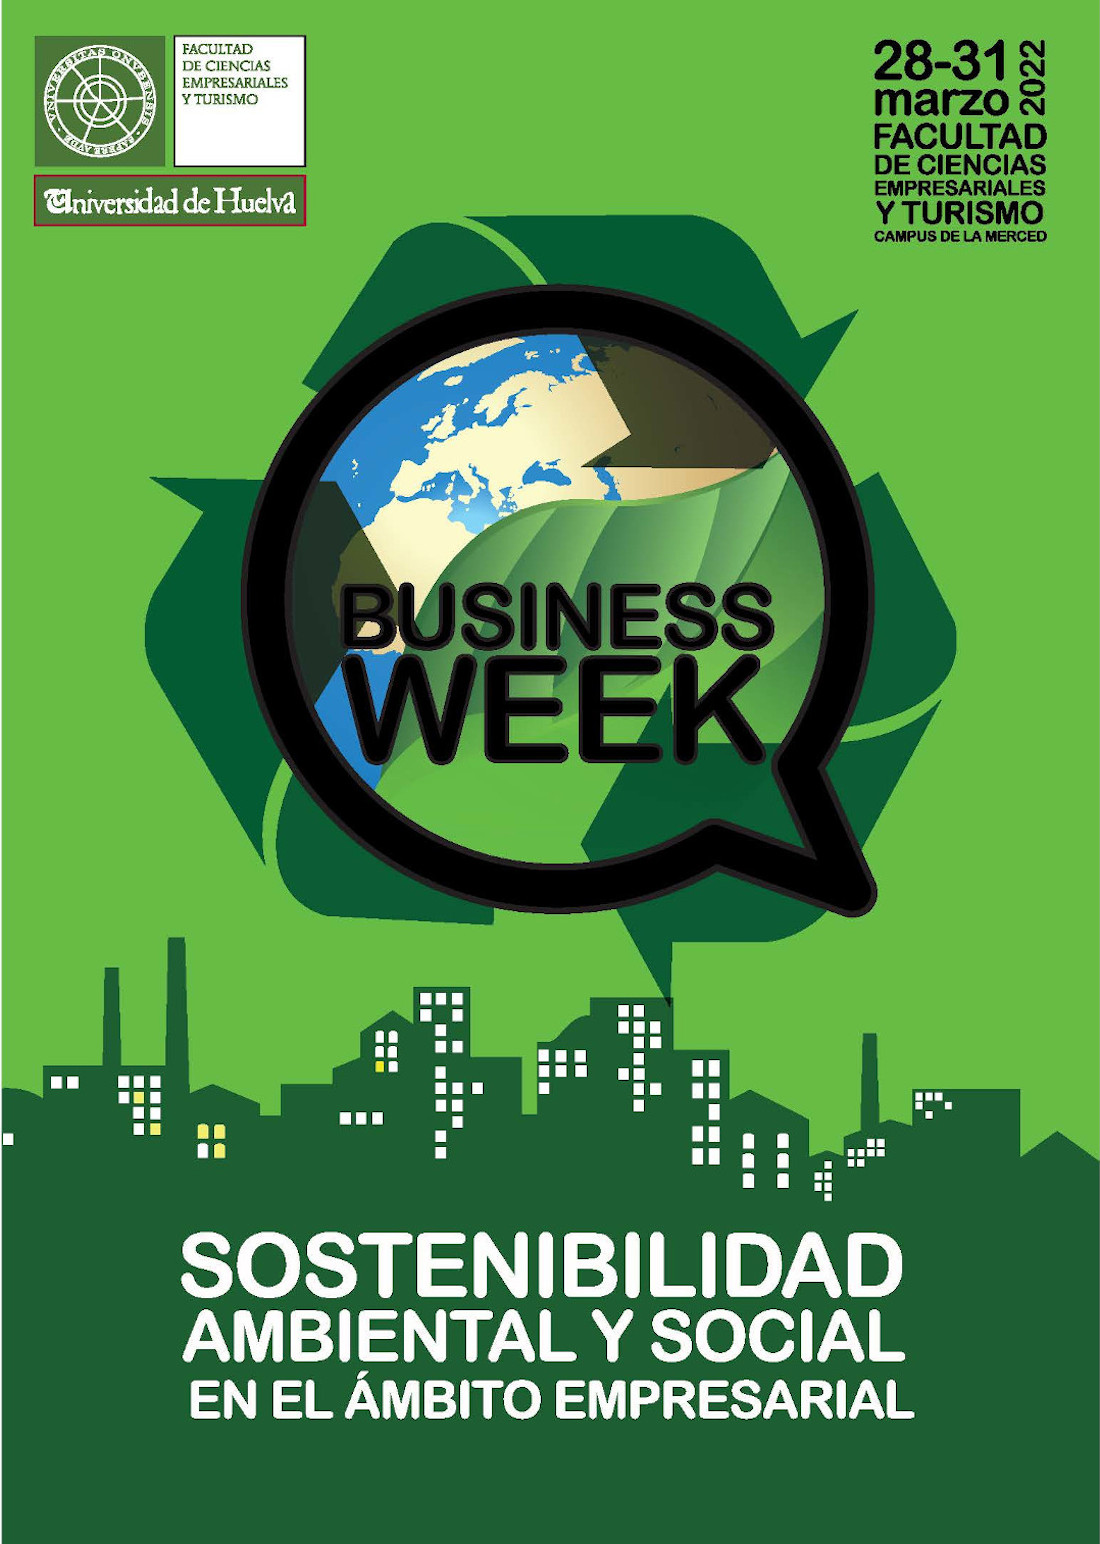 Unicaja’s Edufinet Project will address the relevance of sustainability in the financial sector at the Business Week 2022 of the University of Huelva